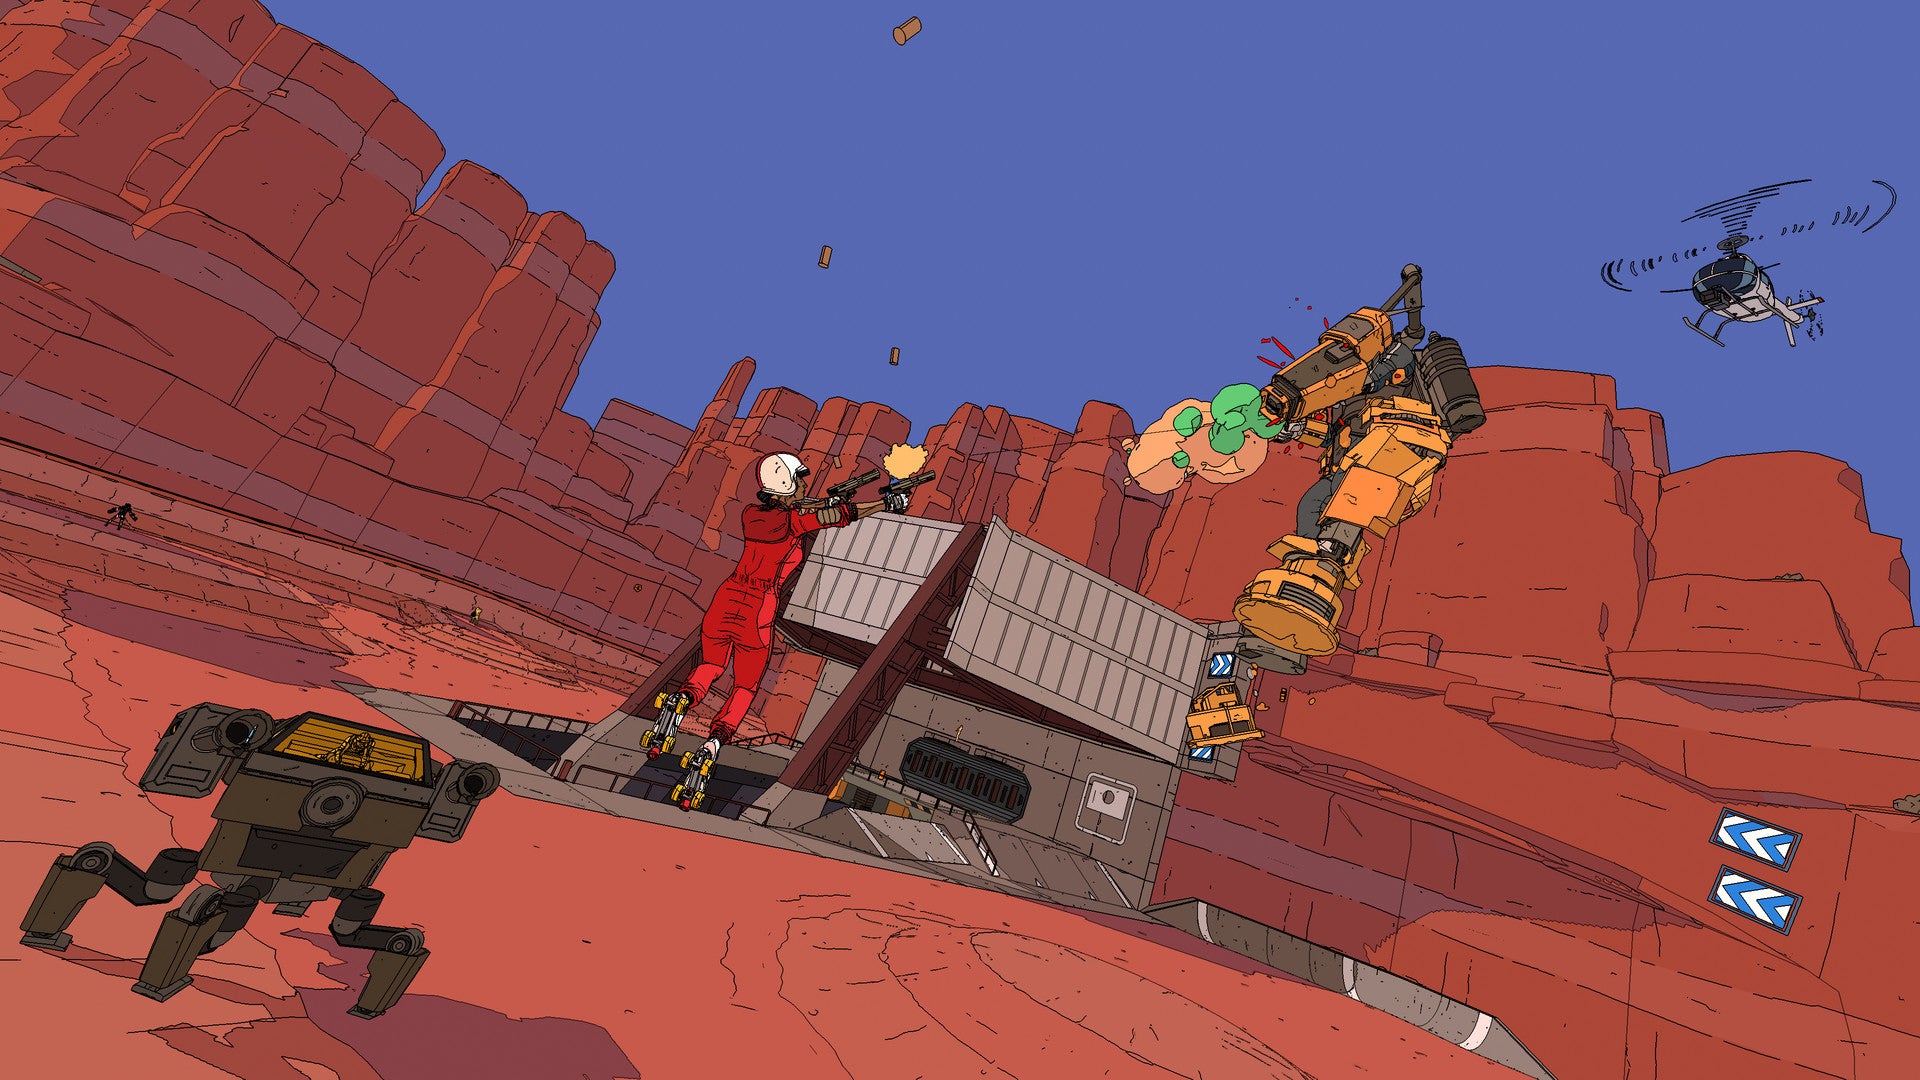 The player character in Rollerdrome flies into the air, shooting a robotic enemy opposite them